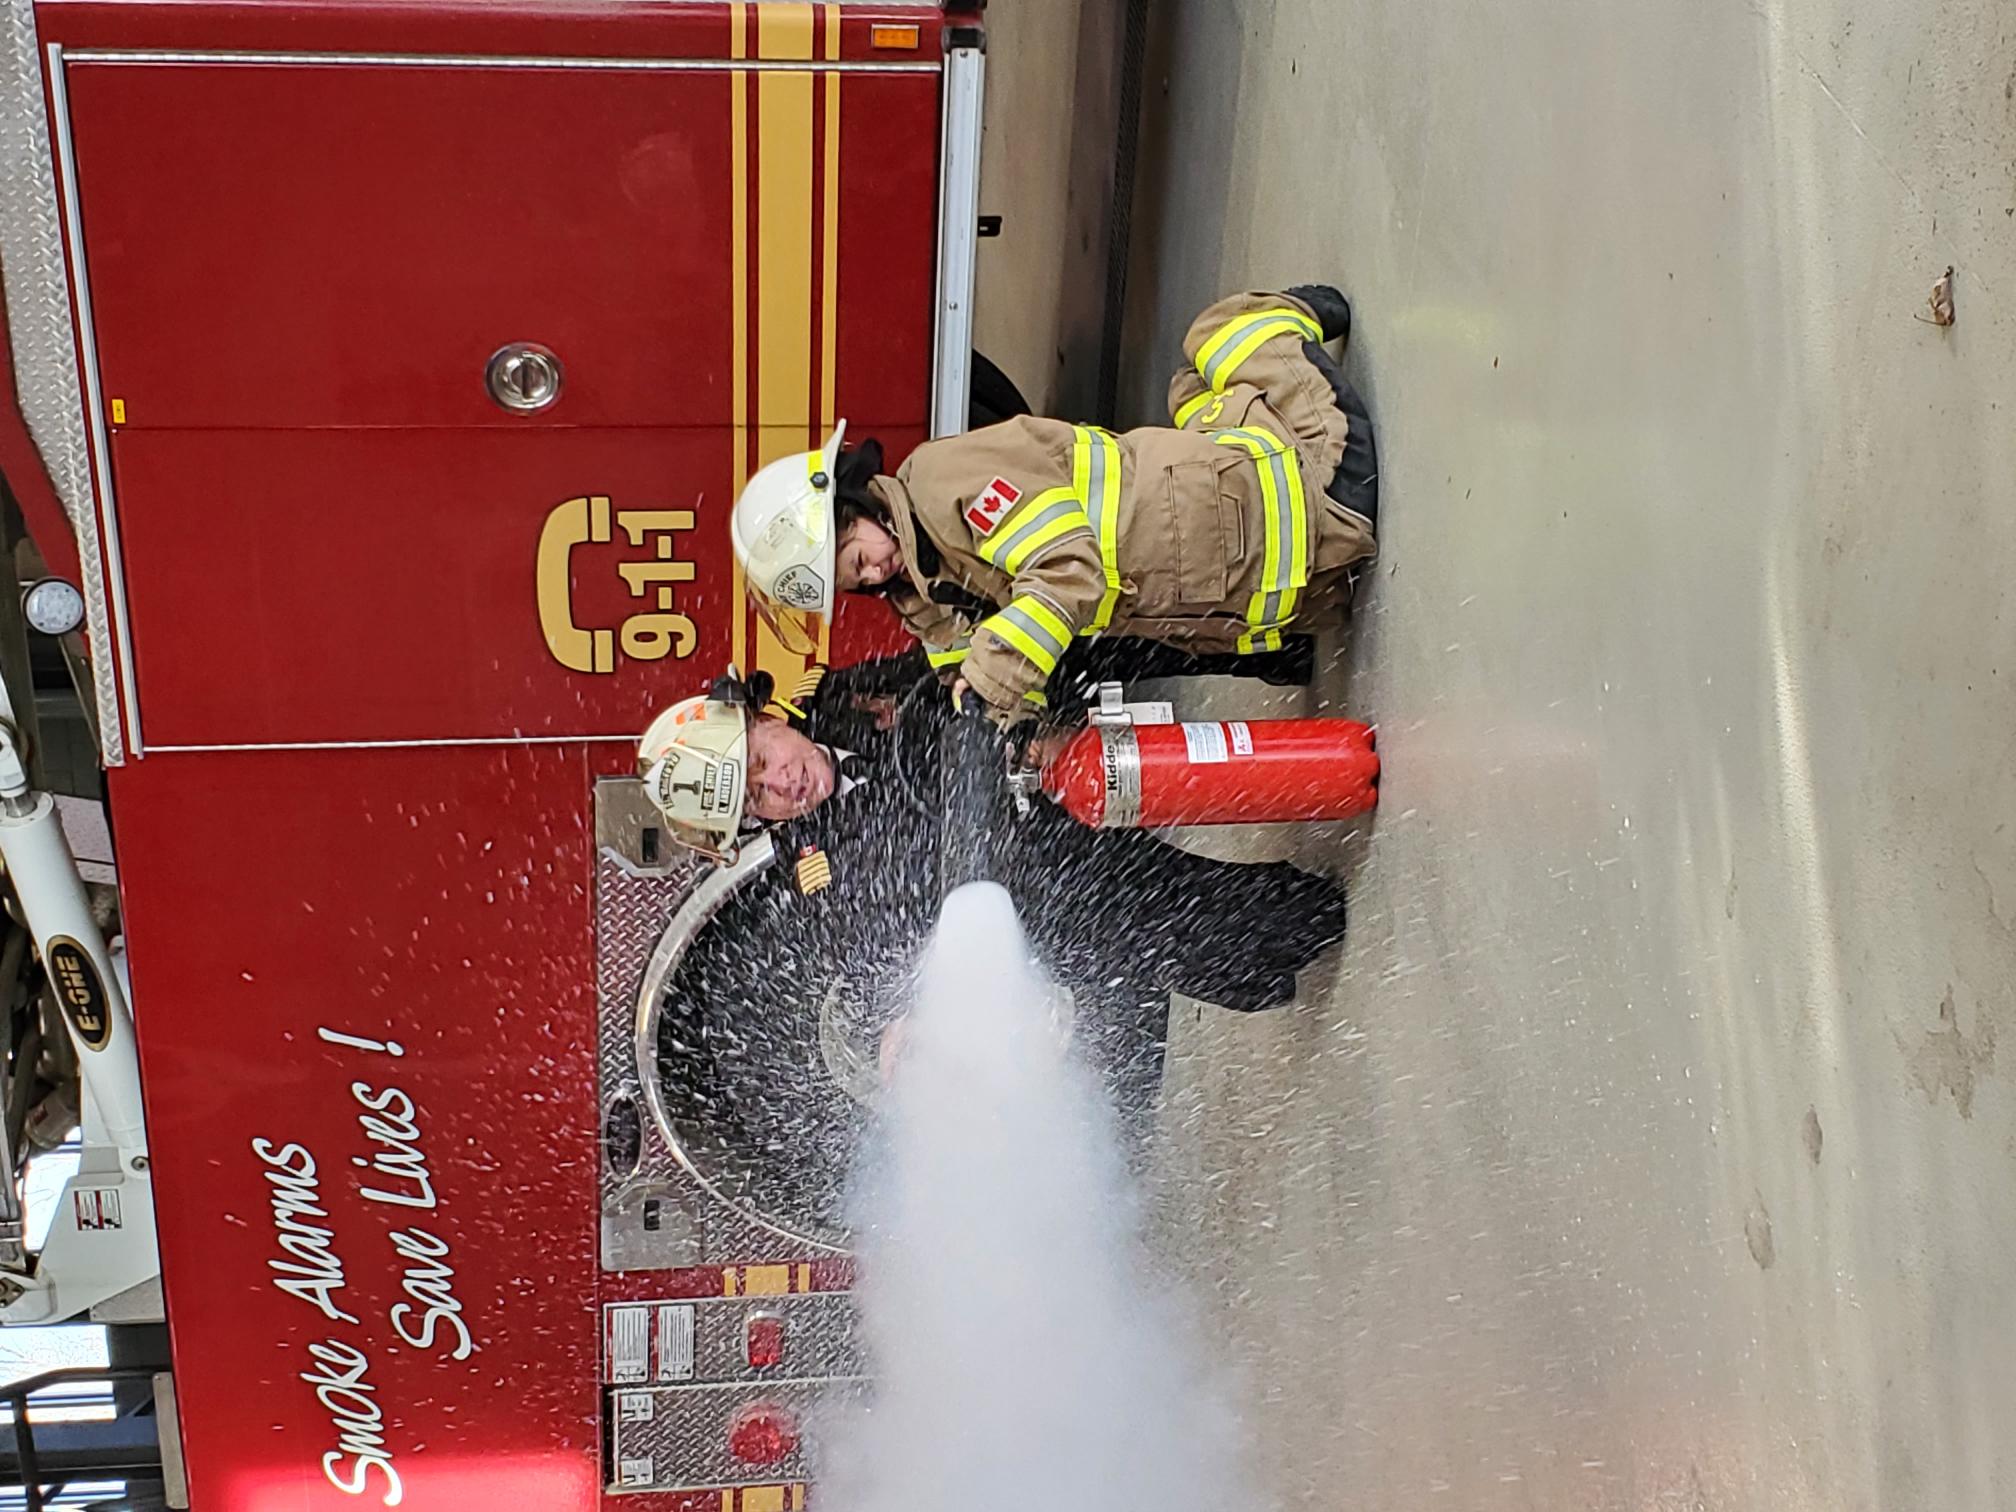 (2) Kathryn Holliday learns how to properly use a fire extinguisher under the close supervision of St. Marys Fire Chief Richard “Andy” Anderson